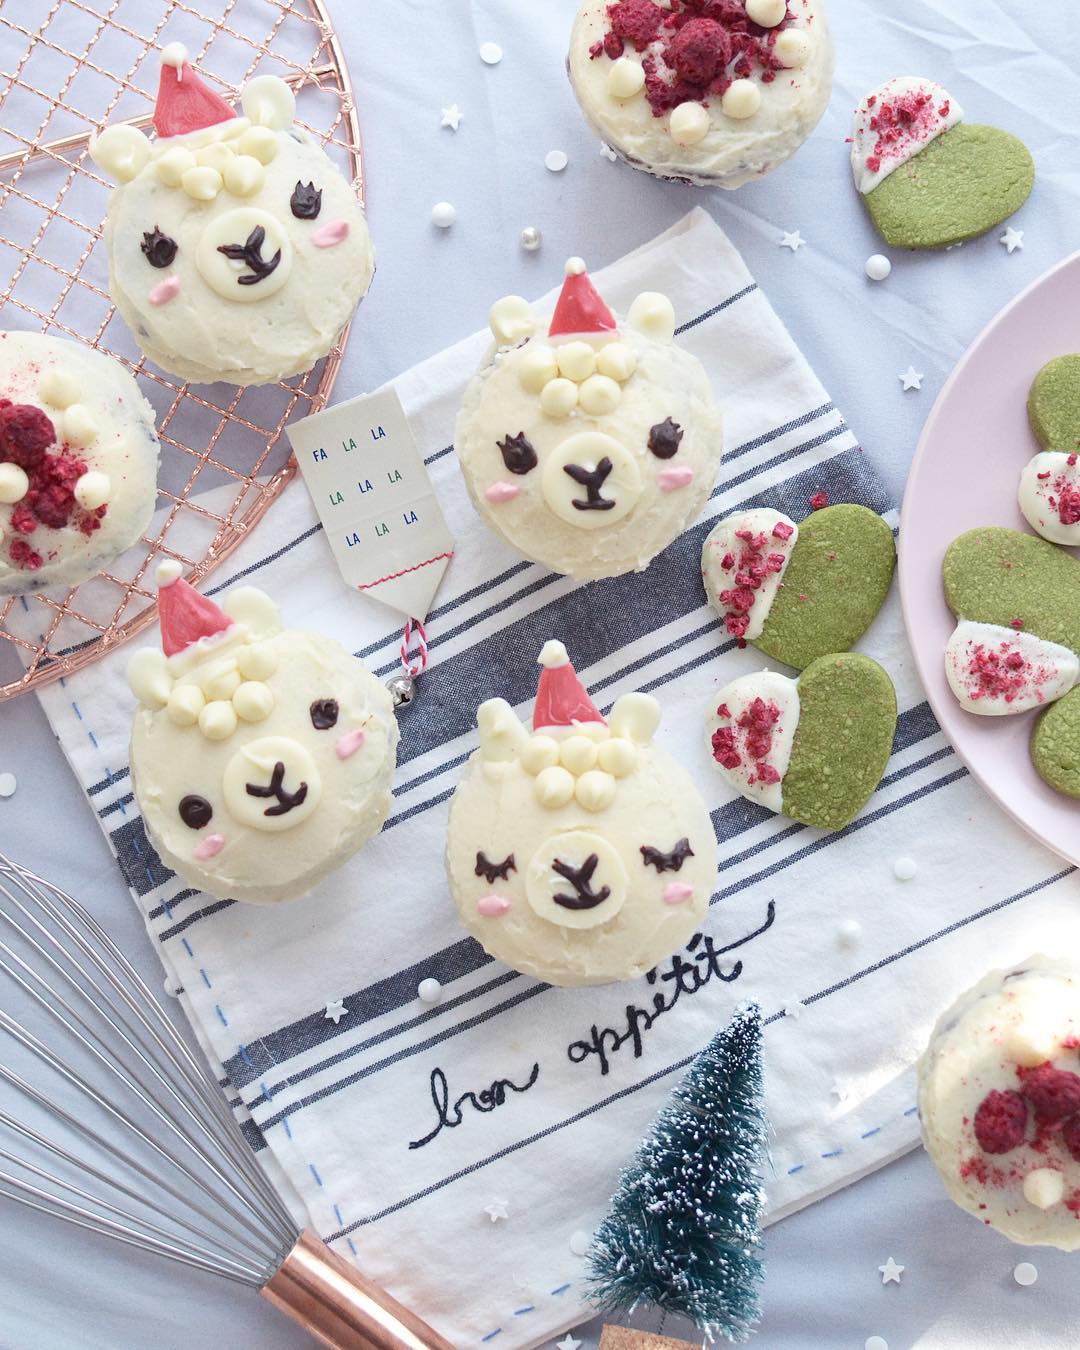 50+ Lovely Llama Crafts, Printables, SVG's DIY's, Food and Gift Ideas: Christmas Llama Cupcakes from Burberrie Jam on Instagram